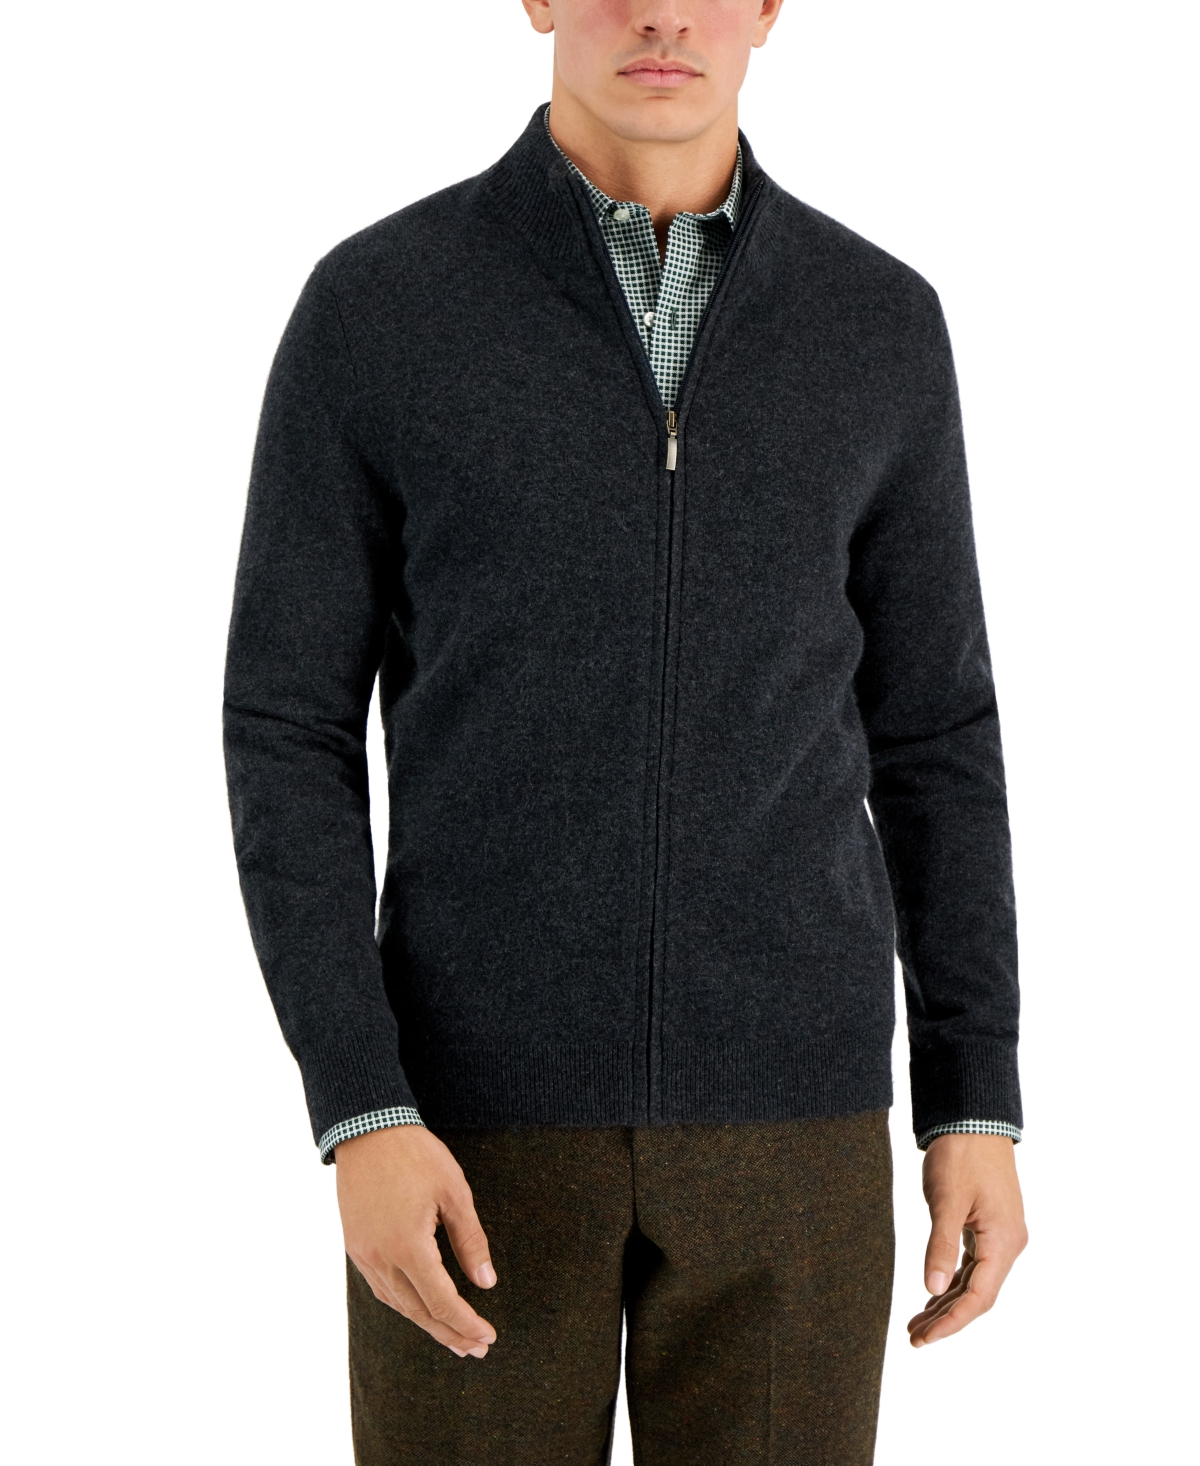 Men's Full-Zip Cashmere Sweater, Created for Macy's - Dark Charcoal Heather